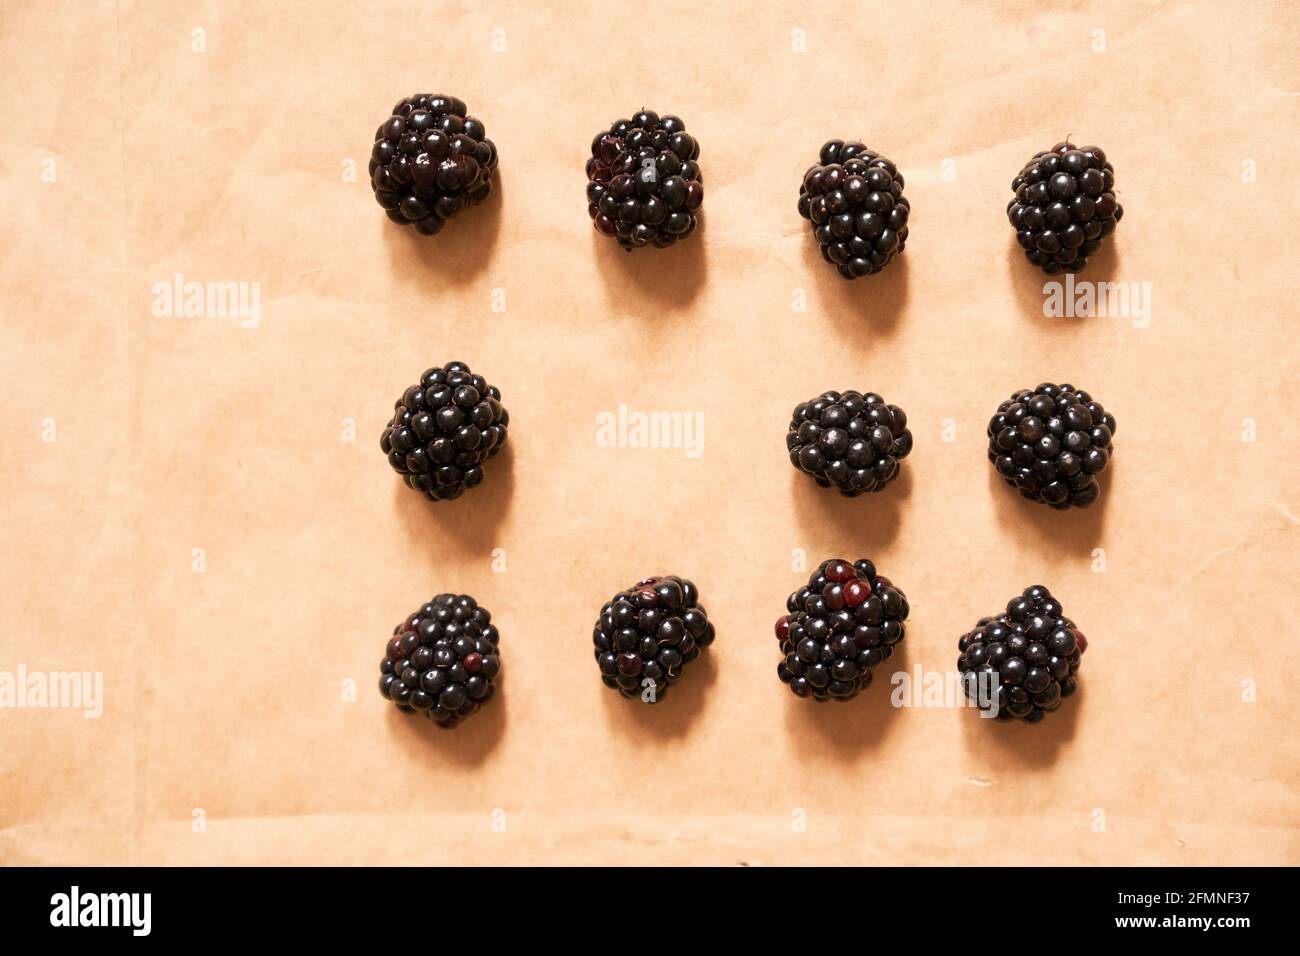 Eleven blackberries on a beige craft paper background. Berries laid out in the form of a rectangle. Horizontal card with copy space. Healthy, delicious, natural vegetarian background. Stock Photo